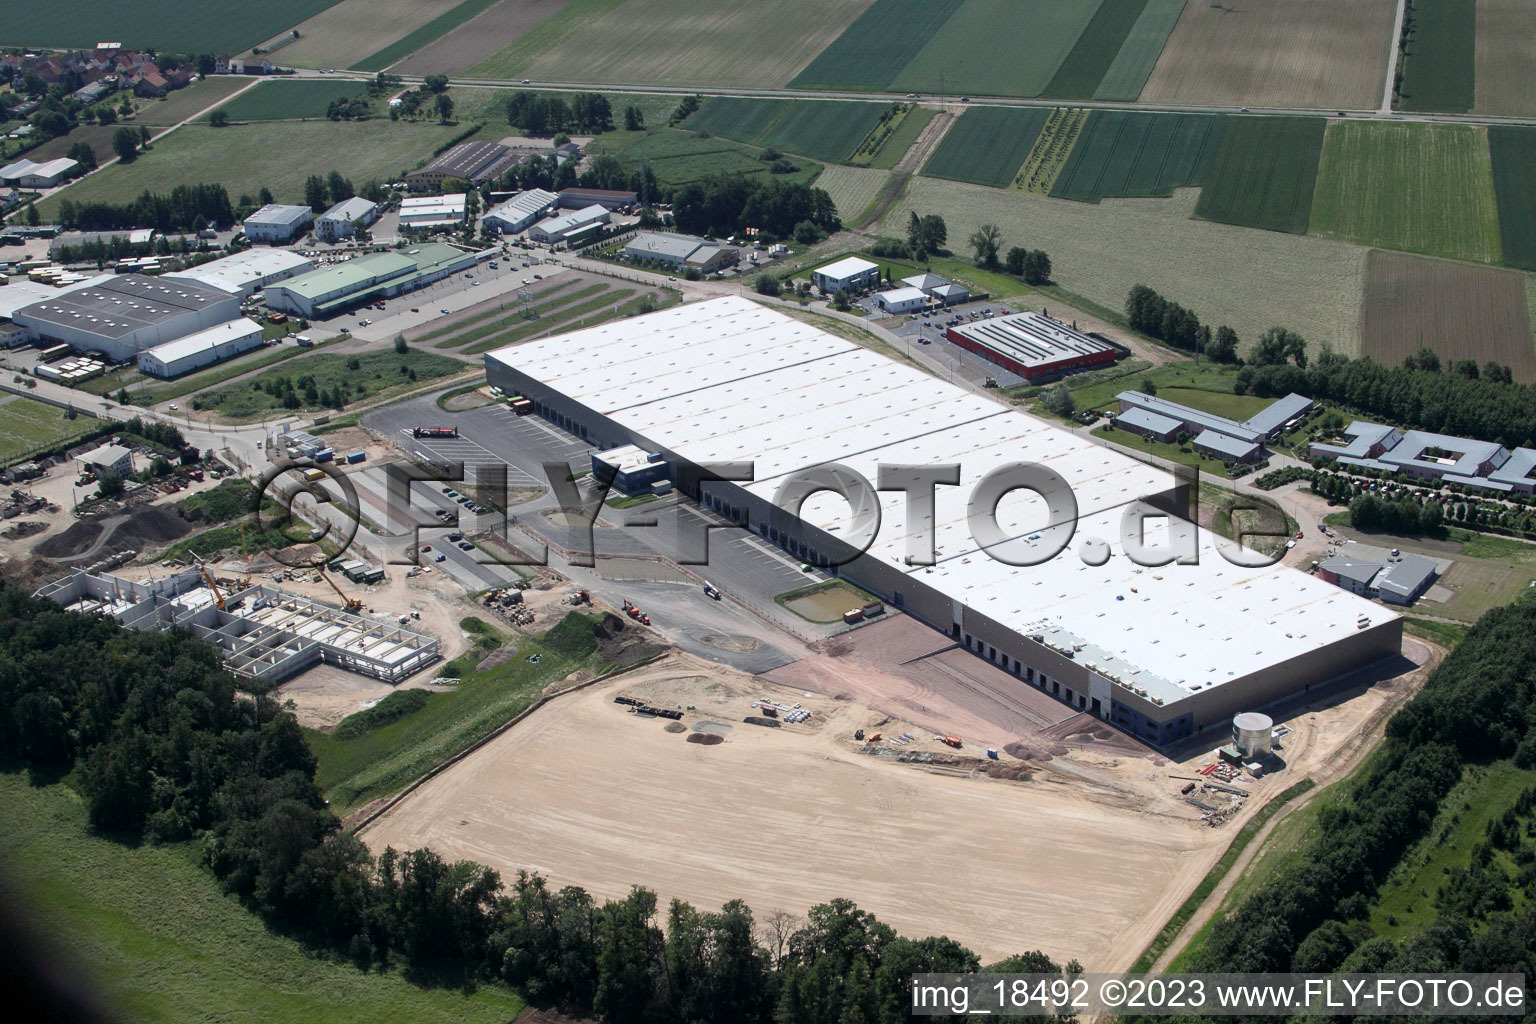 Coincidence logistics center in the district Minderslachen in Kandel in the state Rhineland-Palatinate, Germany seen from a drone